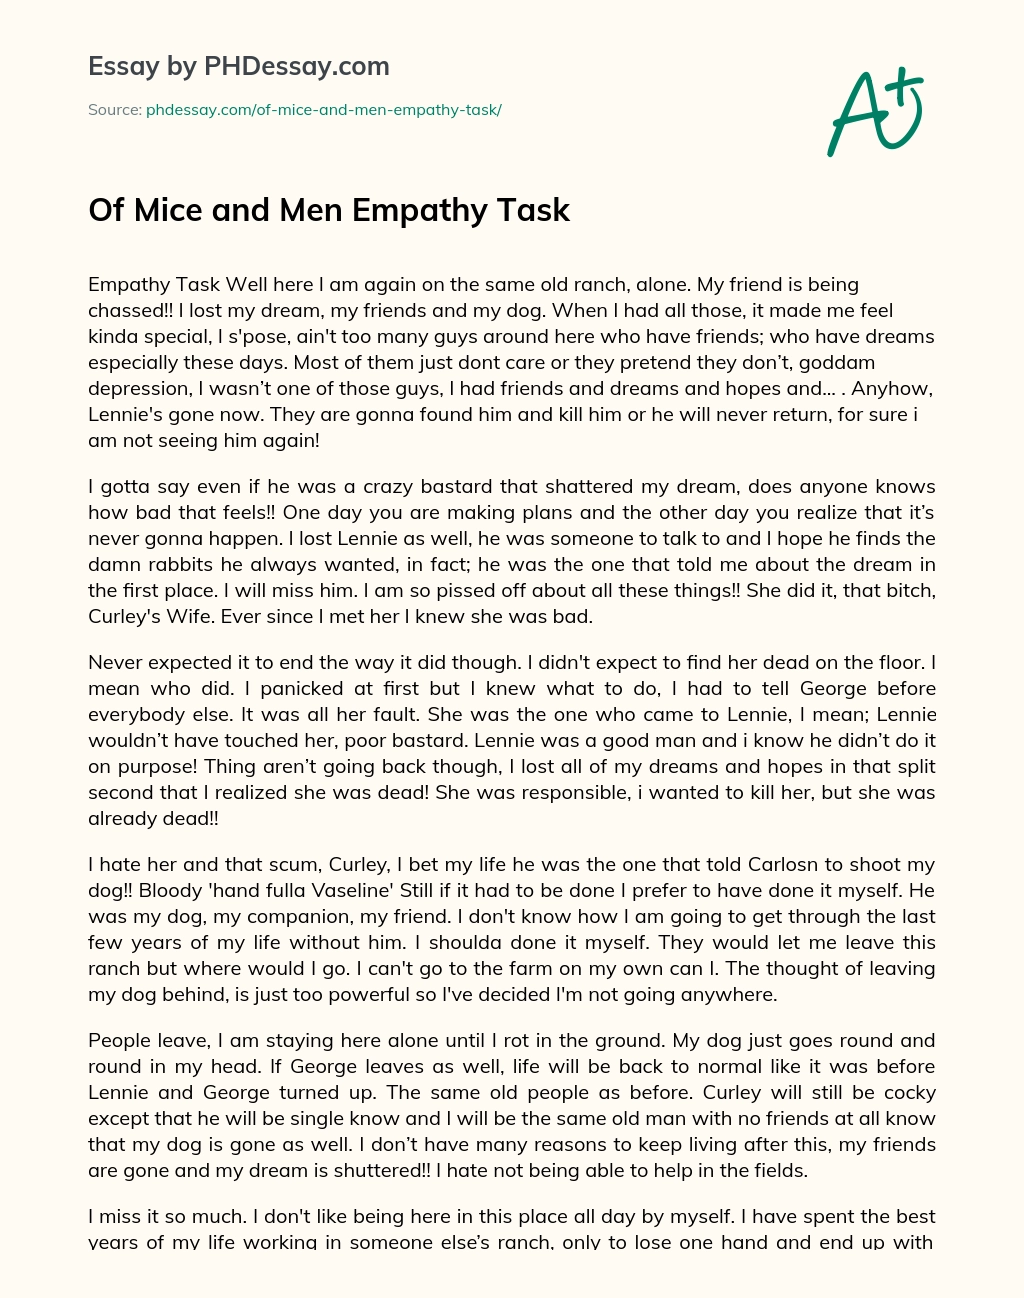 Of Mice and Men Empathy Task essay